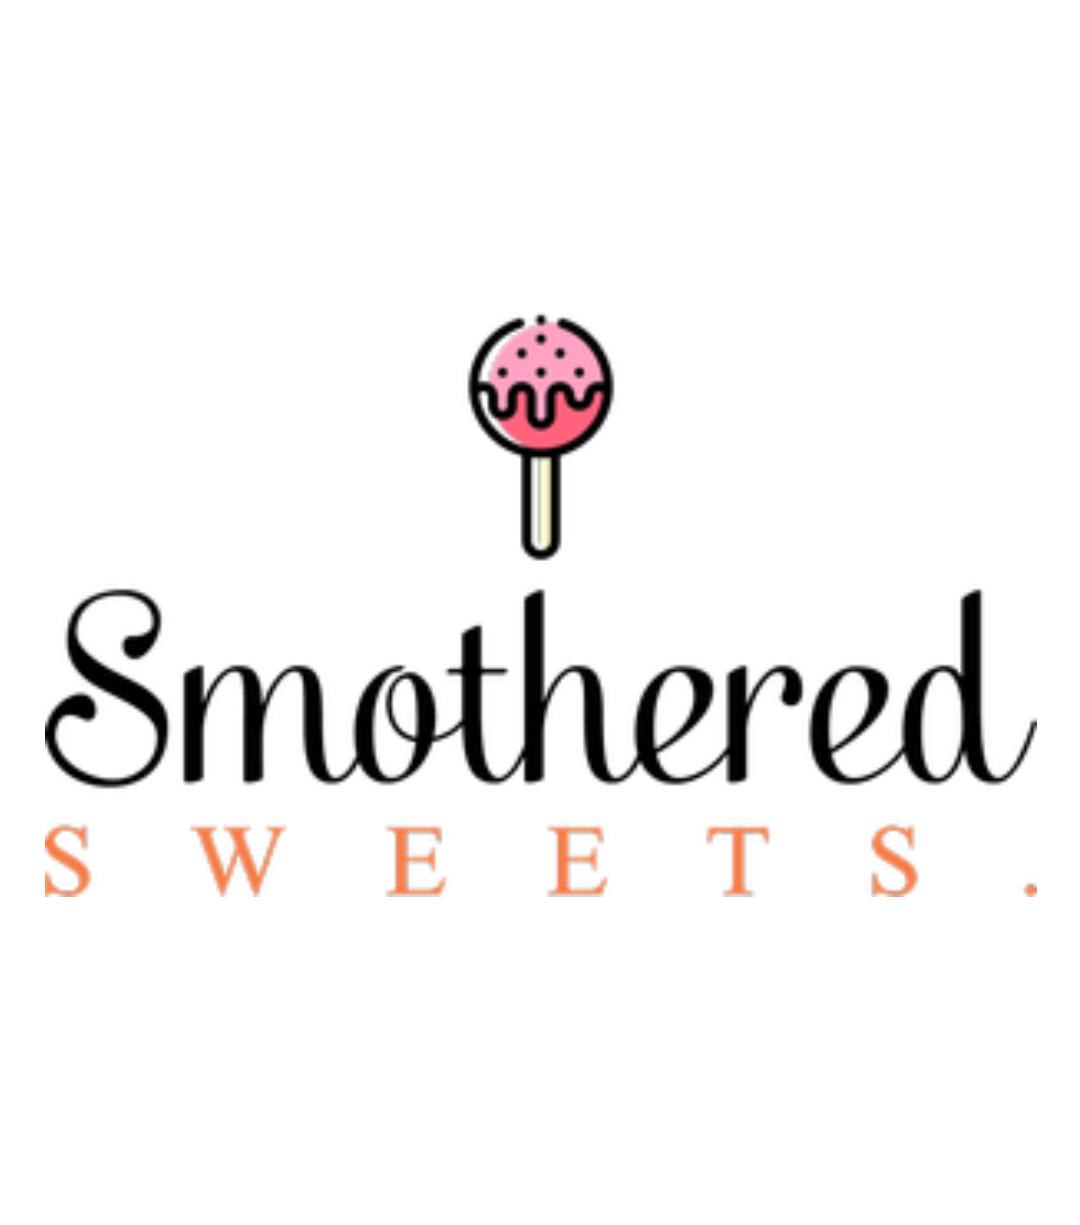 Smothered Sweets